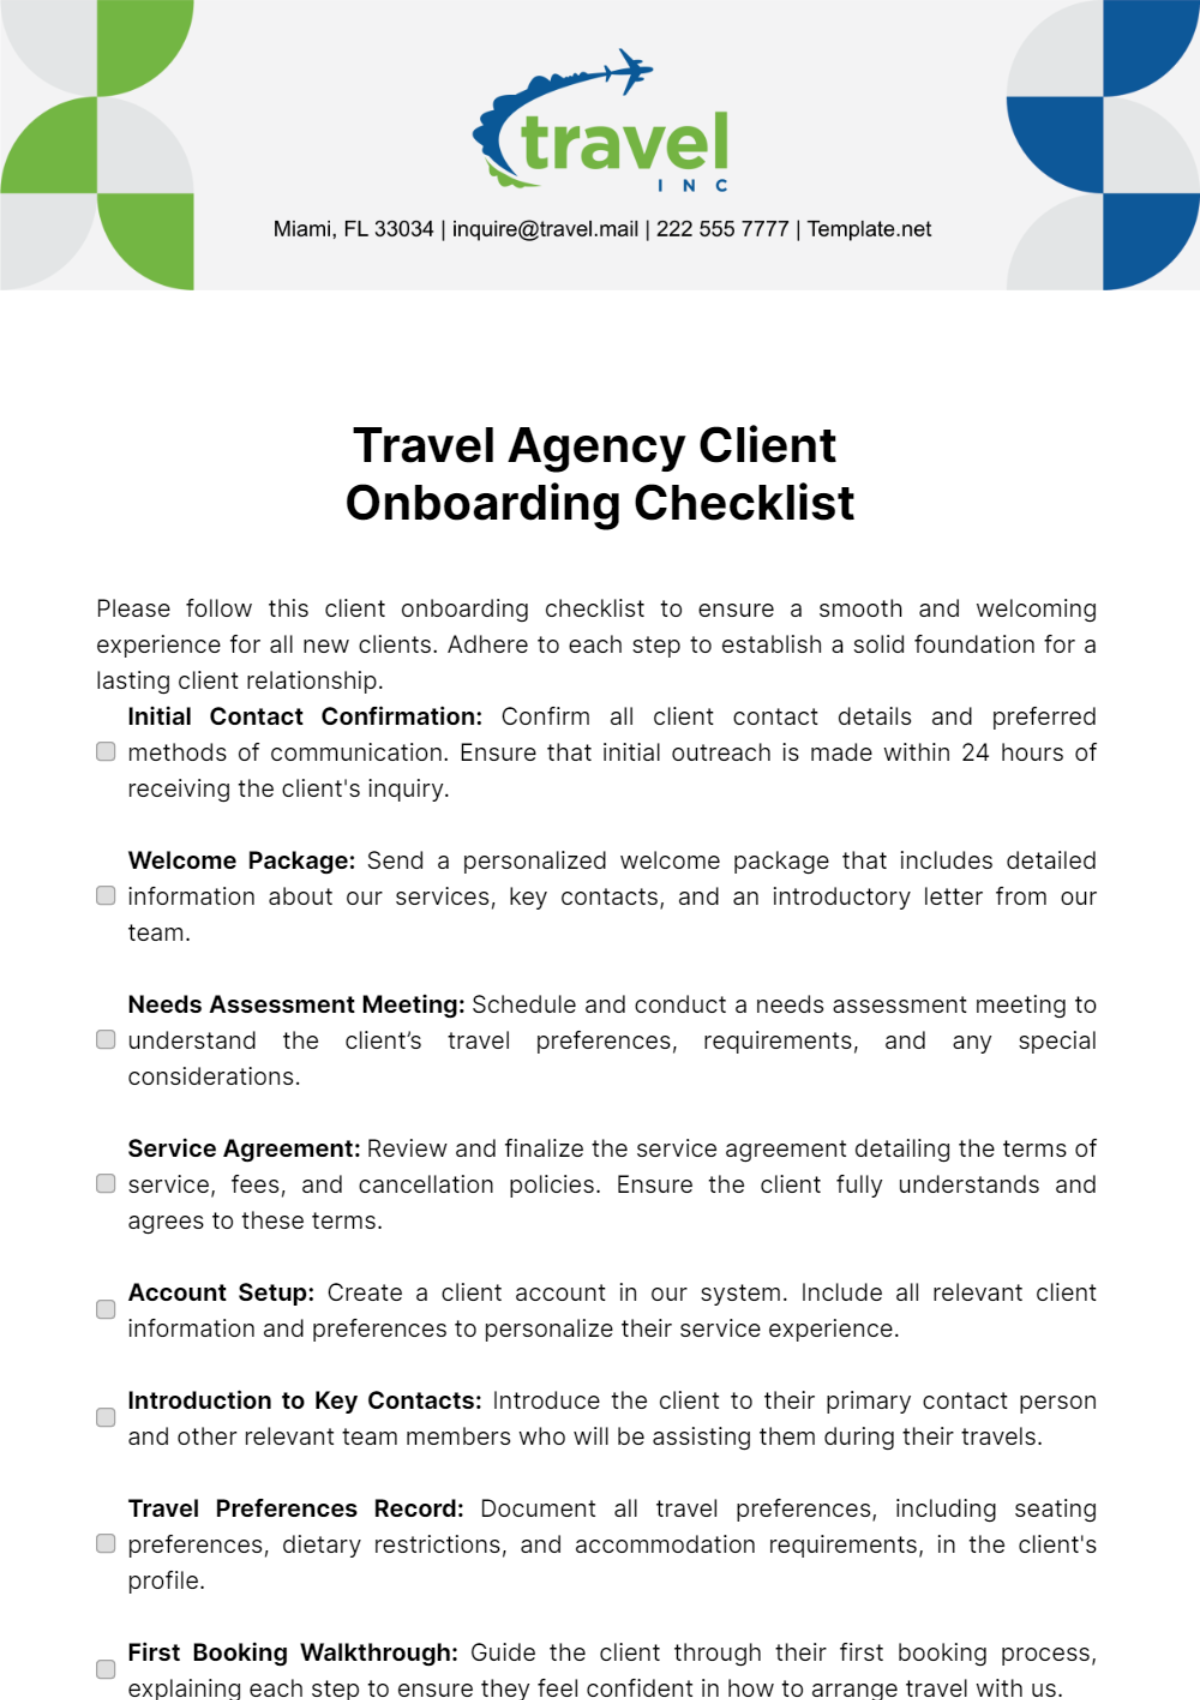 Travel Agency Client Onboarding Checklist Template